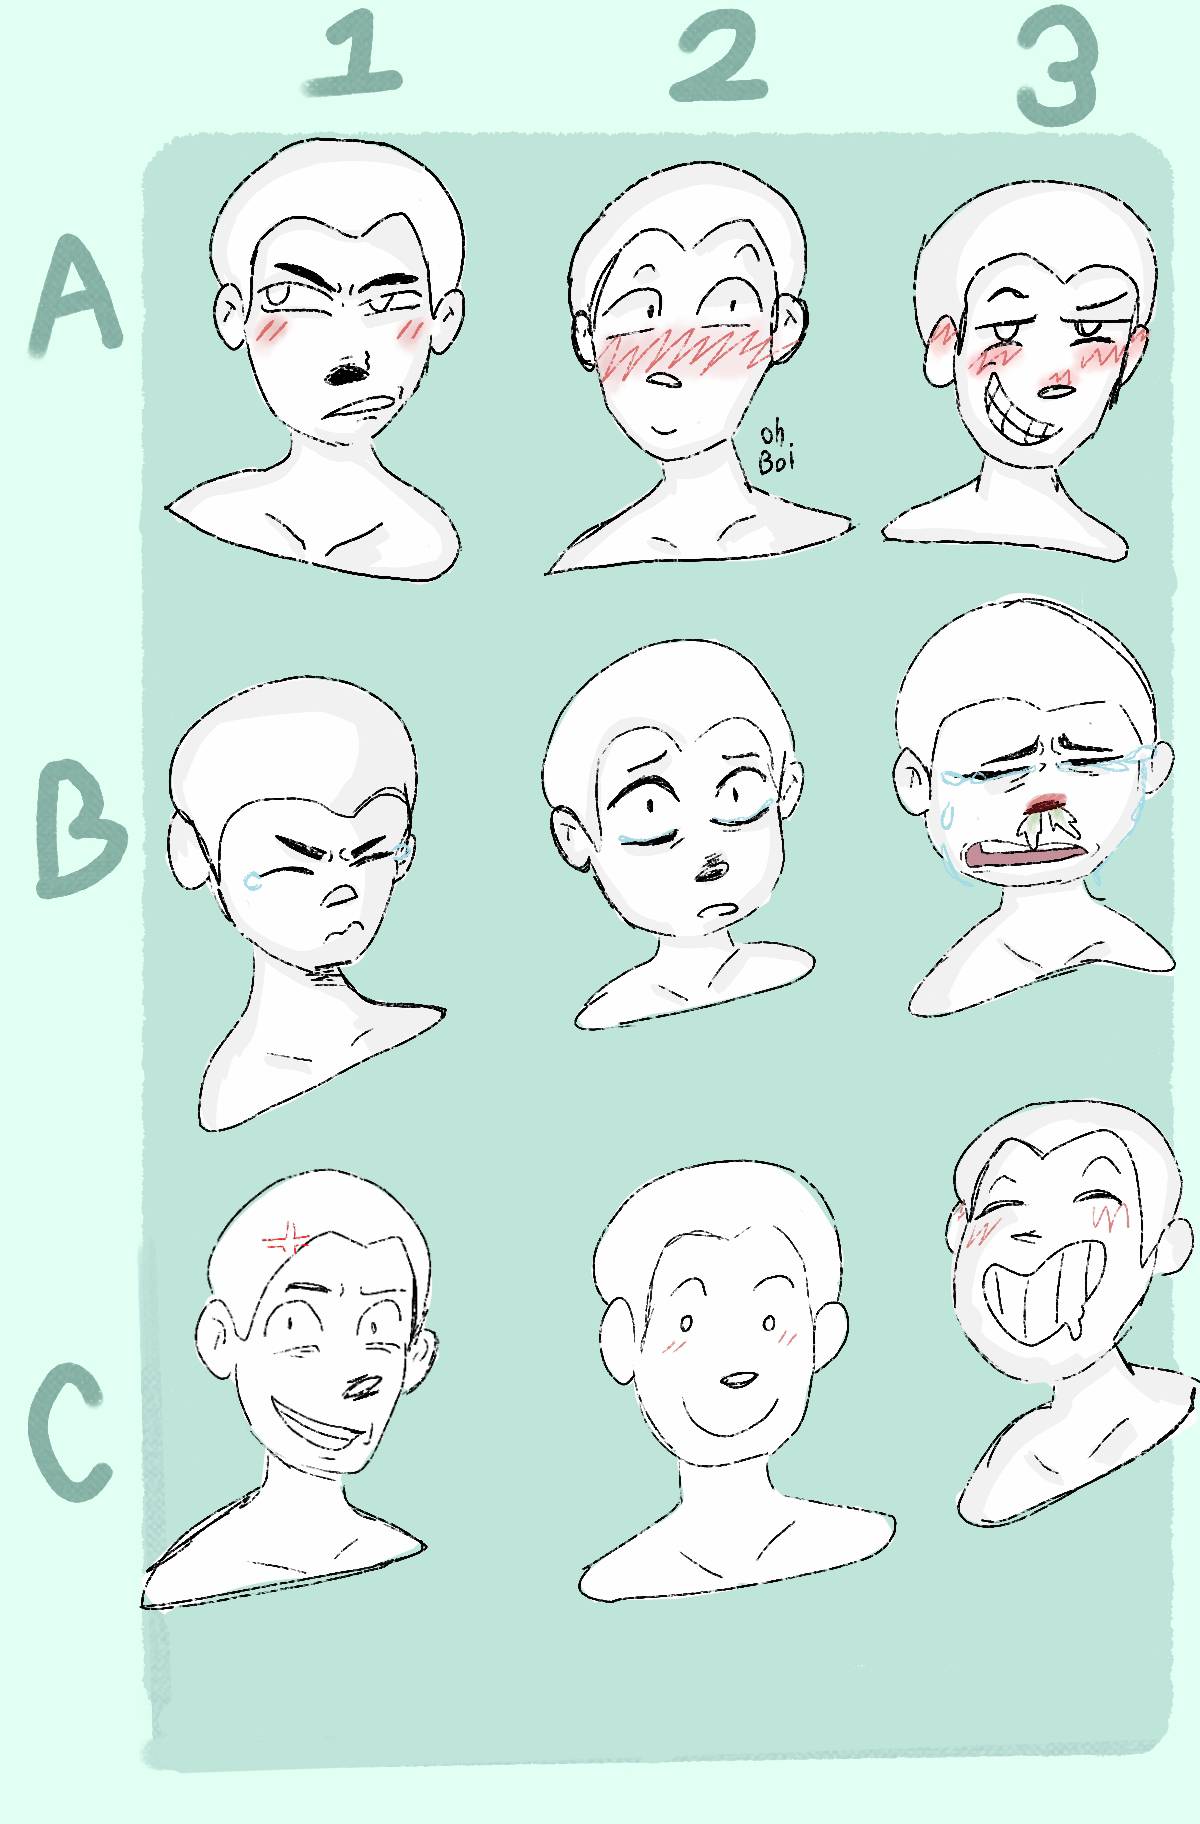 Ych faces by soupdaddy0 on DeviantArt